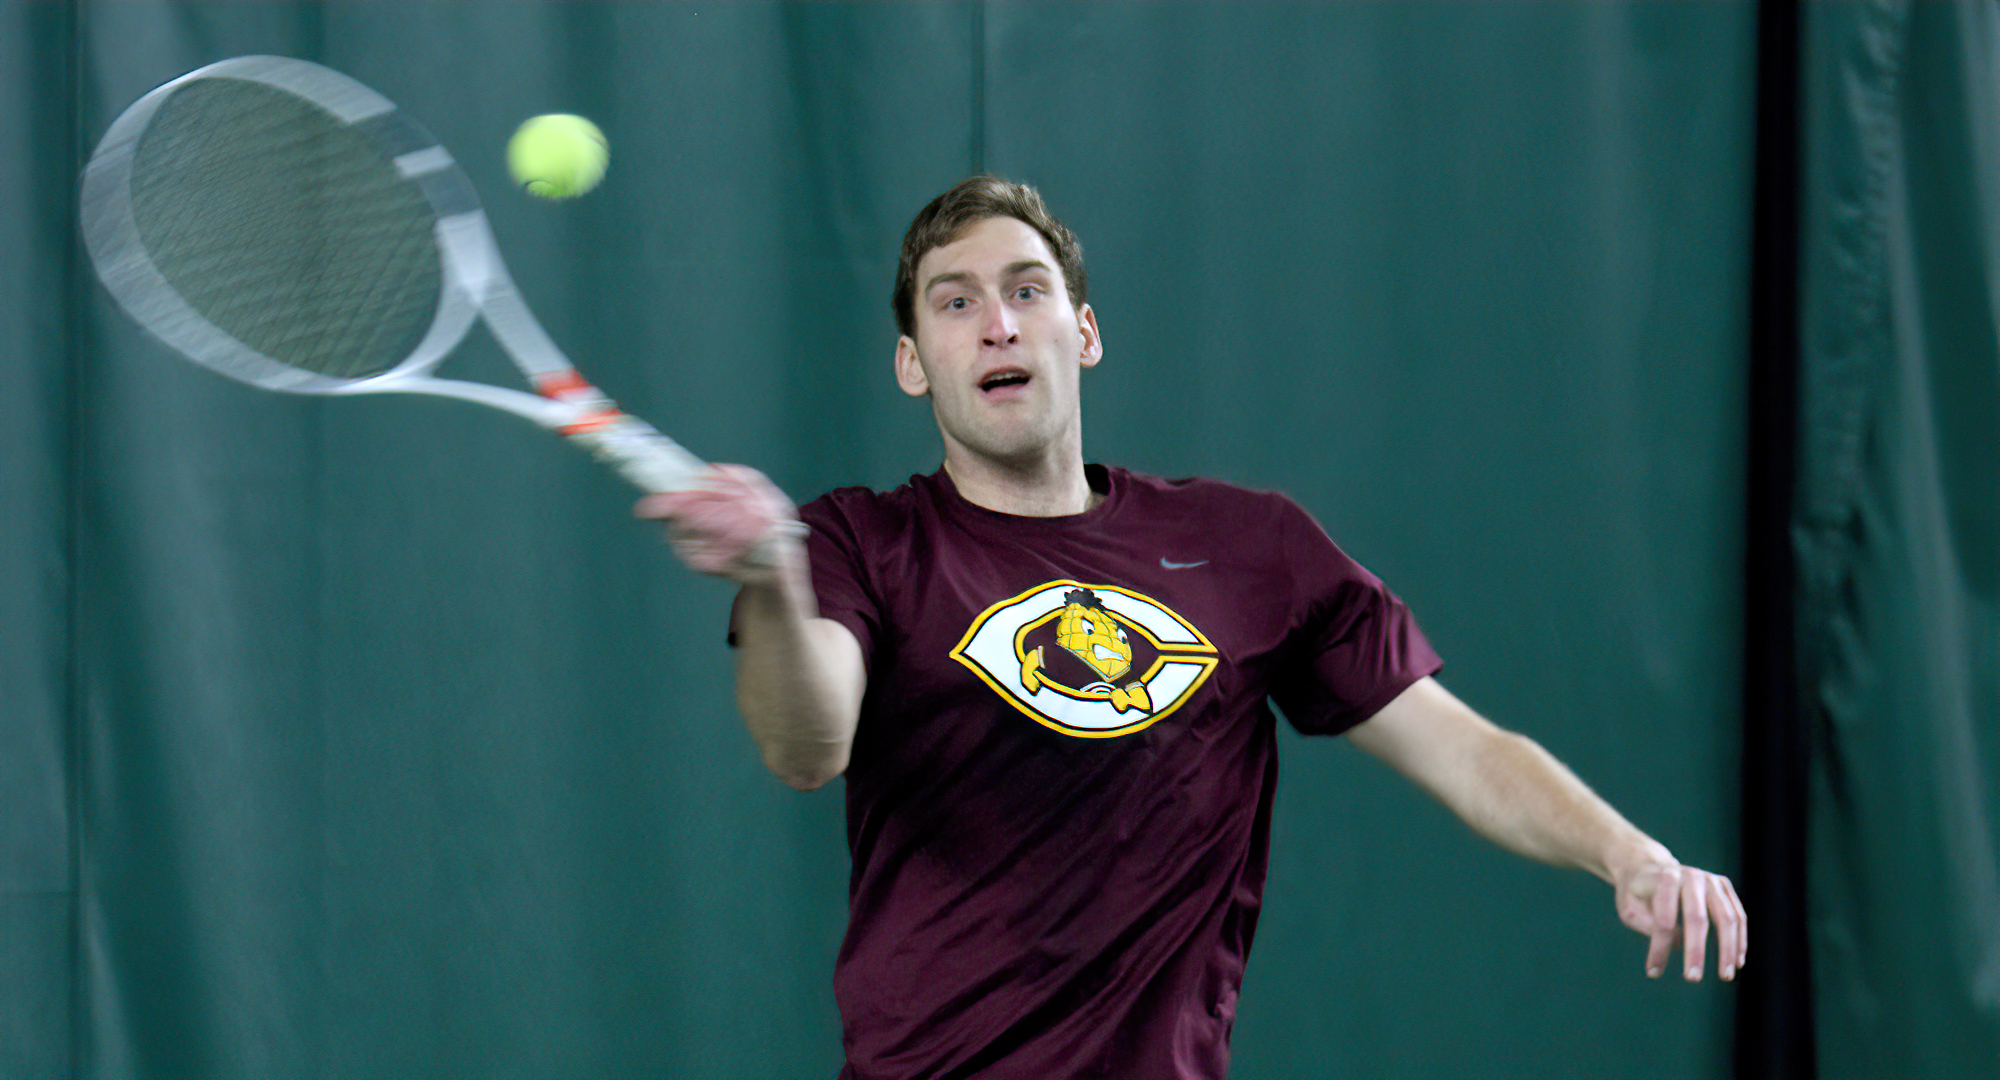 Senior Jake Peters eyes his forehand service return during his singles match in the season opener against Macalester.